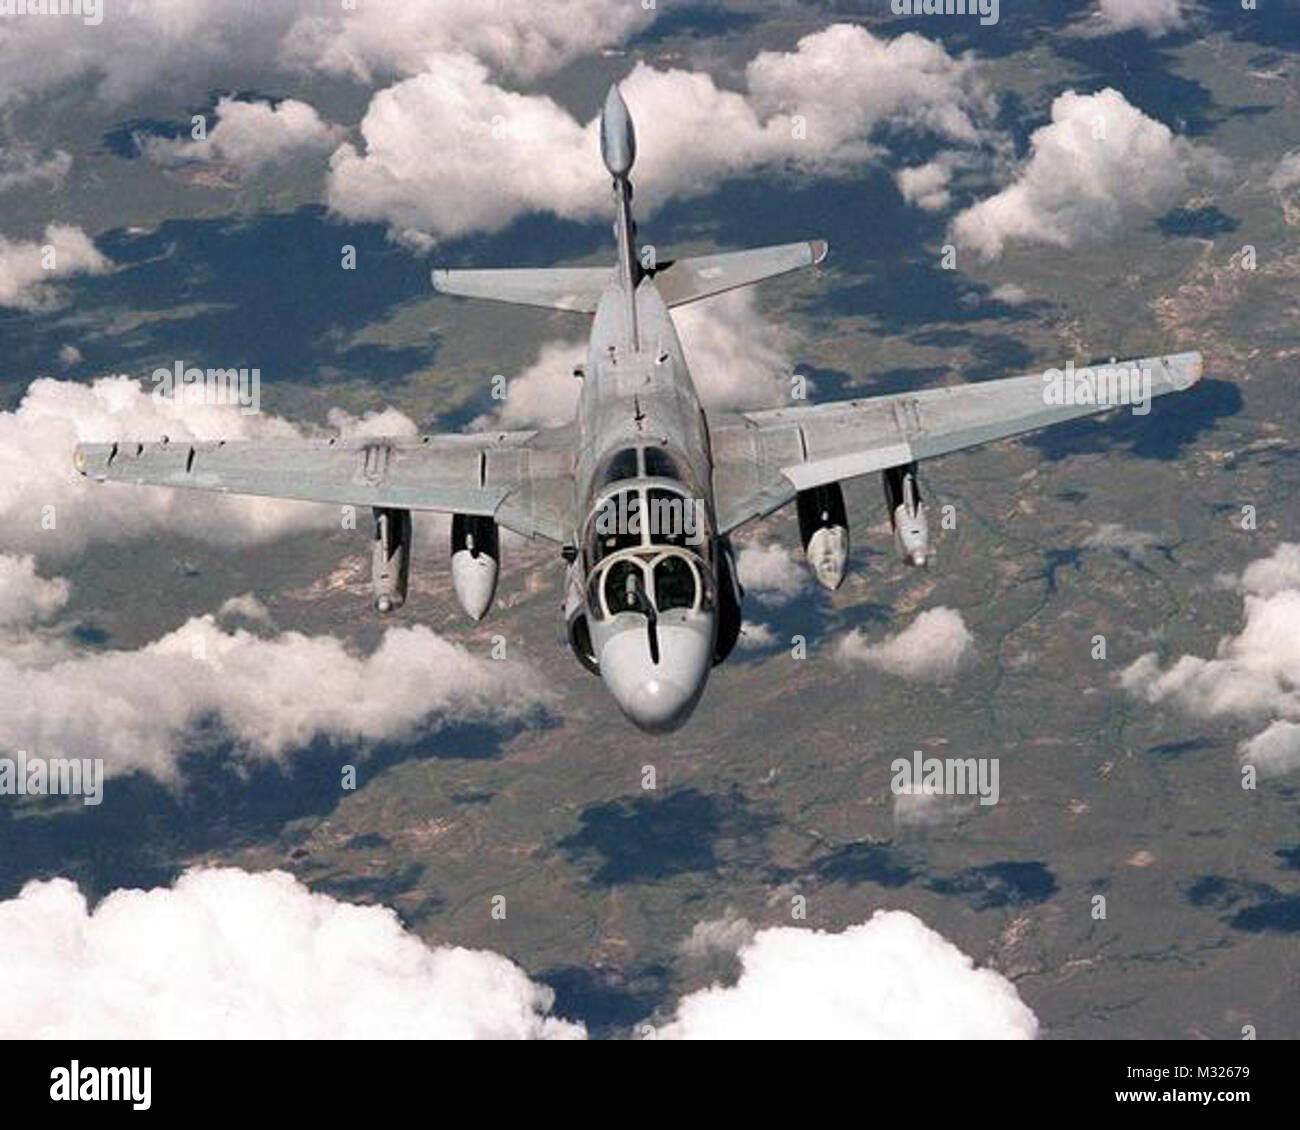 ID: DMSD0108959 000610M8159S048 Released to Public Service Depicted: Marines An Electronic Warfare Squadron Marine Attack Squadron 4 (VMA-Q4) EA6-B Prowler aircraft from Marine Corps Air Station Cherry Point, North Carolina, flys under an Air Force KC-10 (not shown) after refueling on its way to Cold Lake Canada for Operation MAPLE FLAG 00. Date Shot: 10 JUN 2000Camera Operator: LCPL C.E. SELLERS, USMC DM-SD-01-08959 by navalsafetycenter Stock Photo